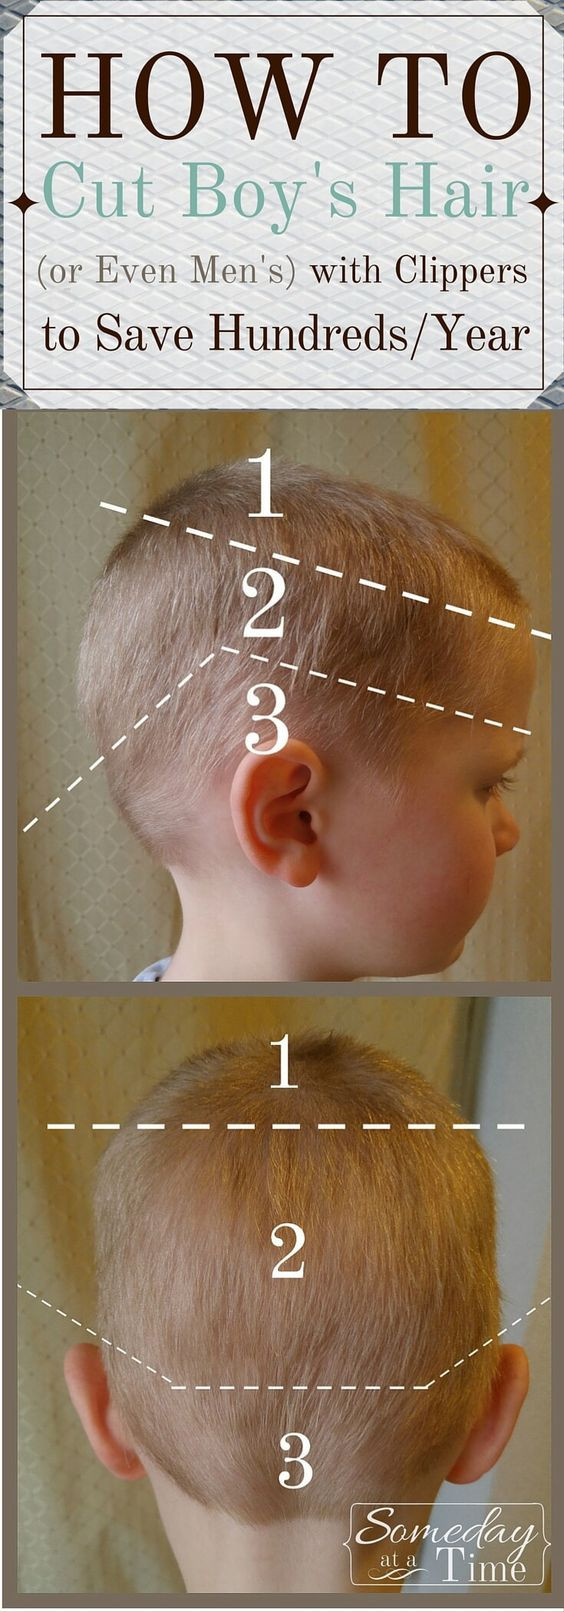 How To Cut Boys Hair With Clippers
 How to Cut Boy s Hair or Even Men s with clippers Step